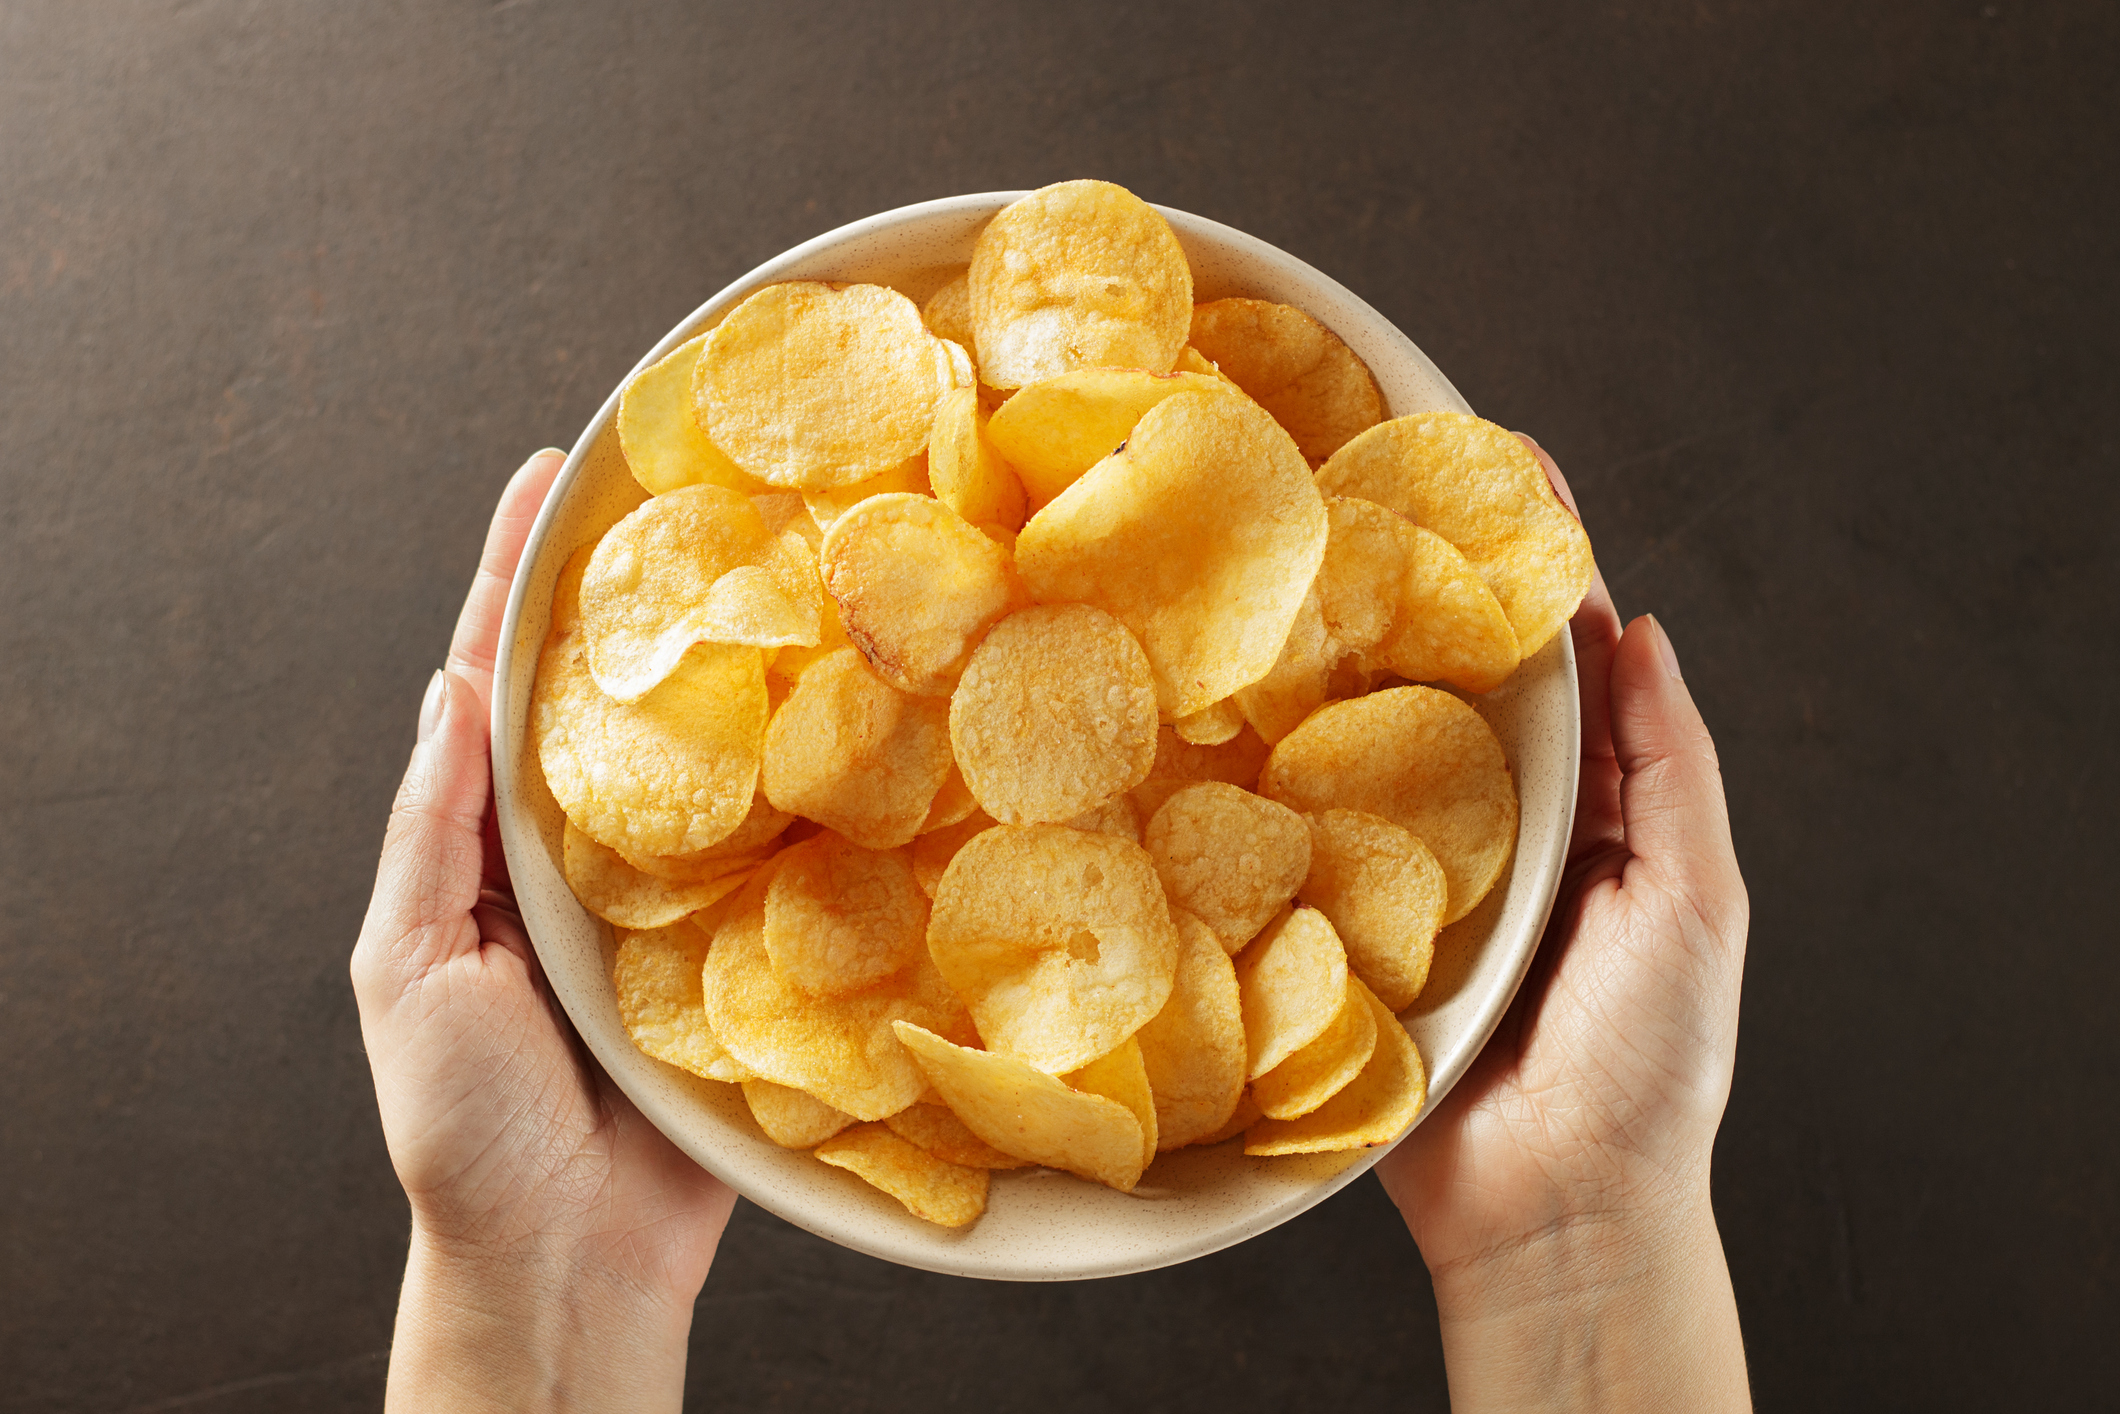 Here's What Would Happen To Your Body And Health If You Only Ate Potato What Happens If You Eat Stale Chips